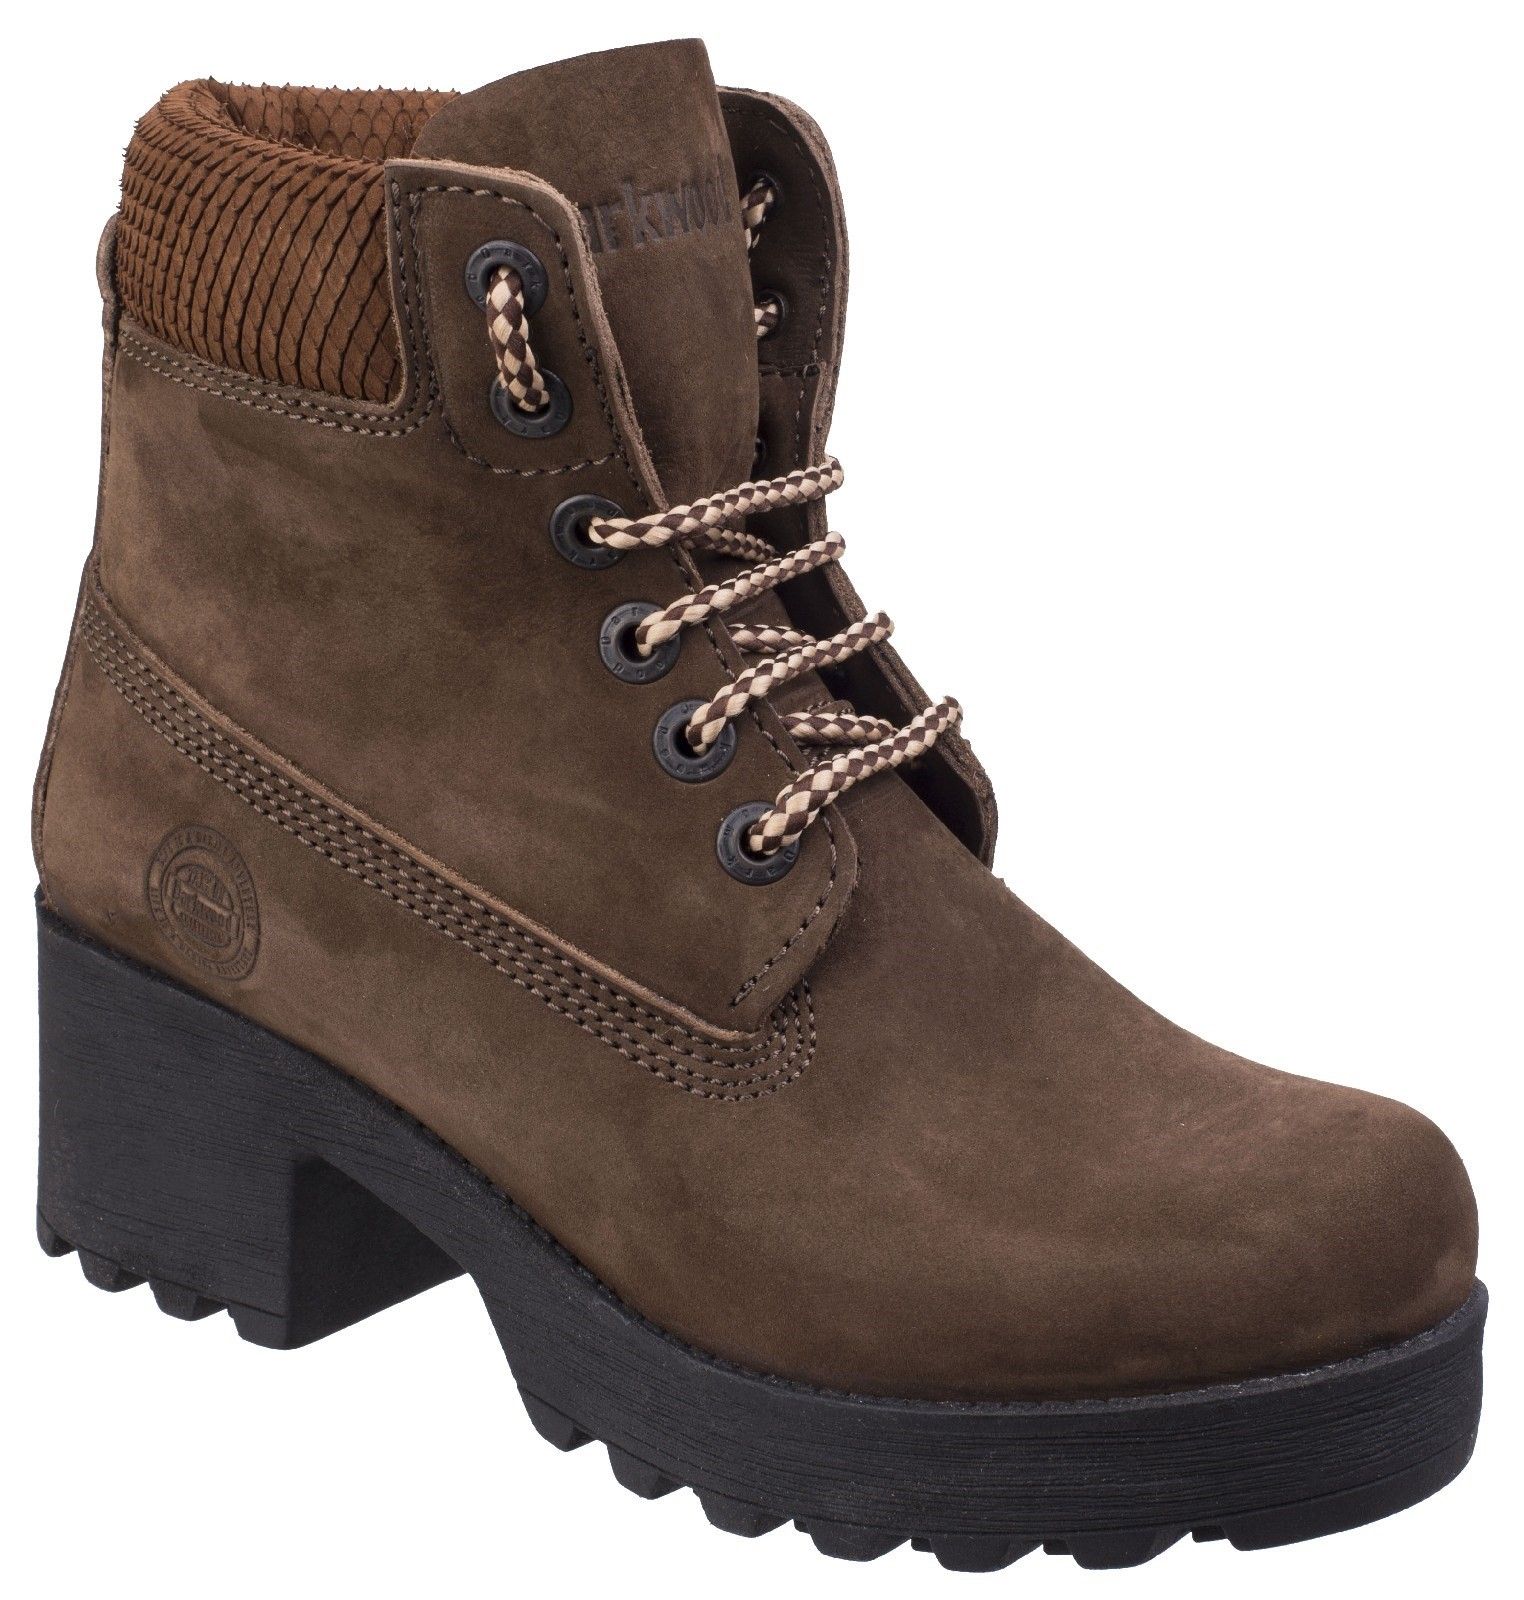 Darkwood boots with classy design, featuring water-resistant membrane. Perfect for hiking and cold weather conditions. Womens water-resistant casual boot. 
Warm-Lining. 
Ideal for autumn and winter. 
Water-resistant genuine leather. 
Good level of puncture resistance against brambles.